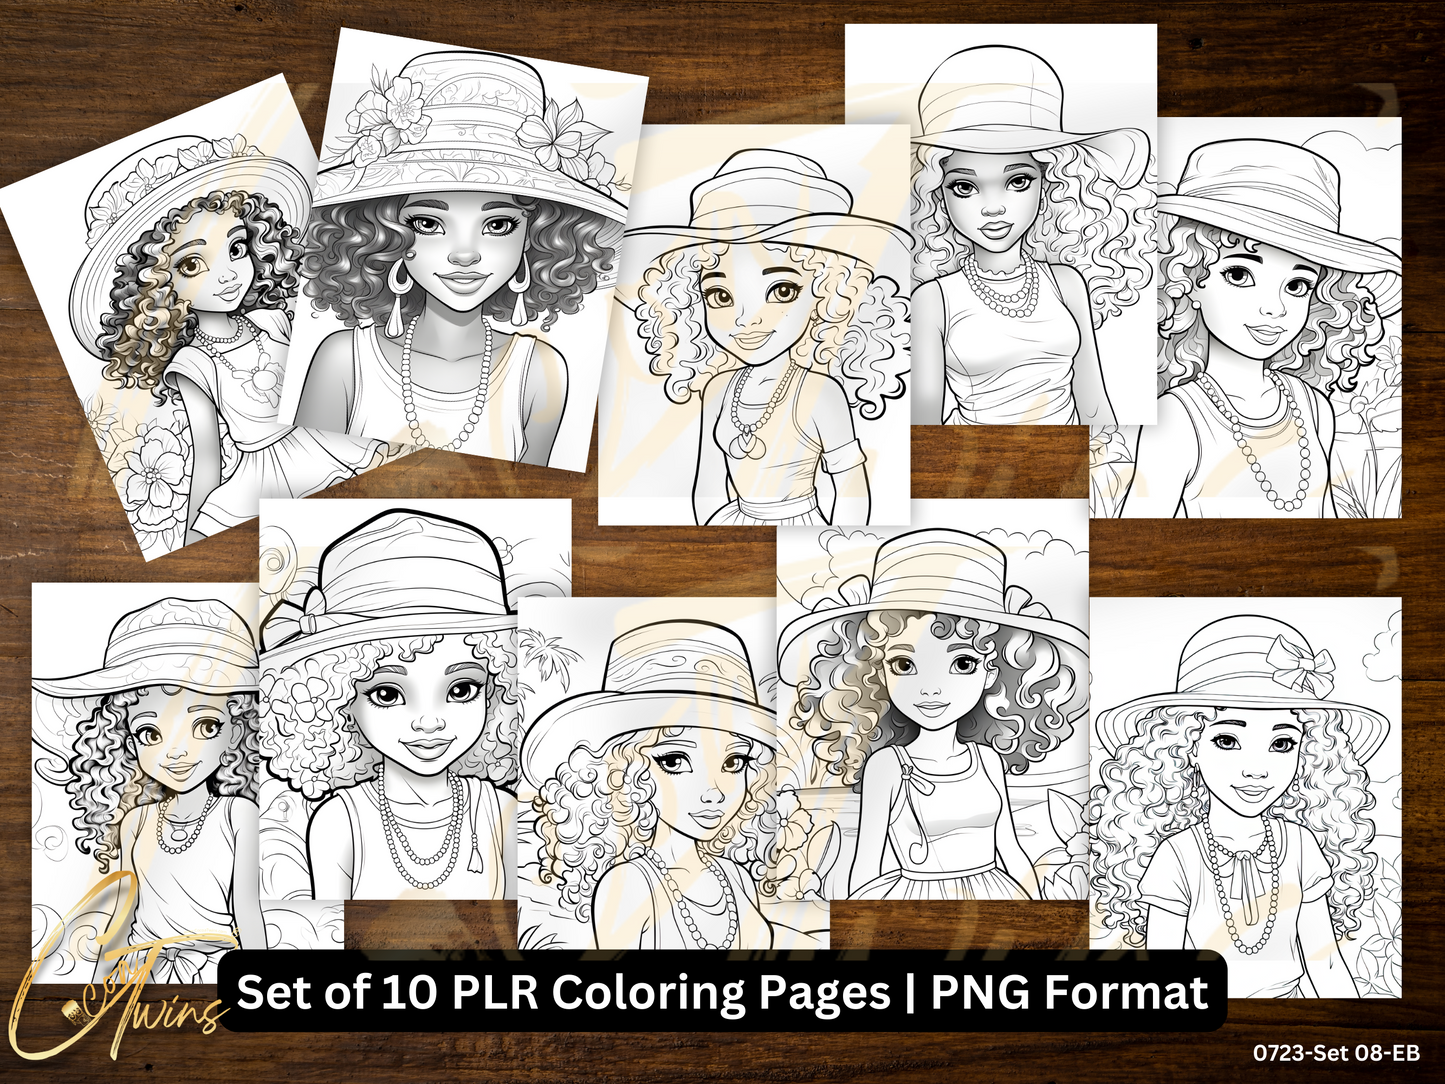 Limited Edition | PLR Coloring Pages | Set 08-EB (0723)